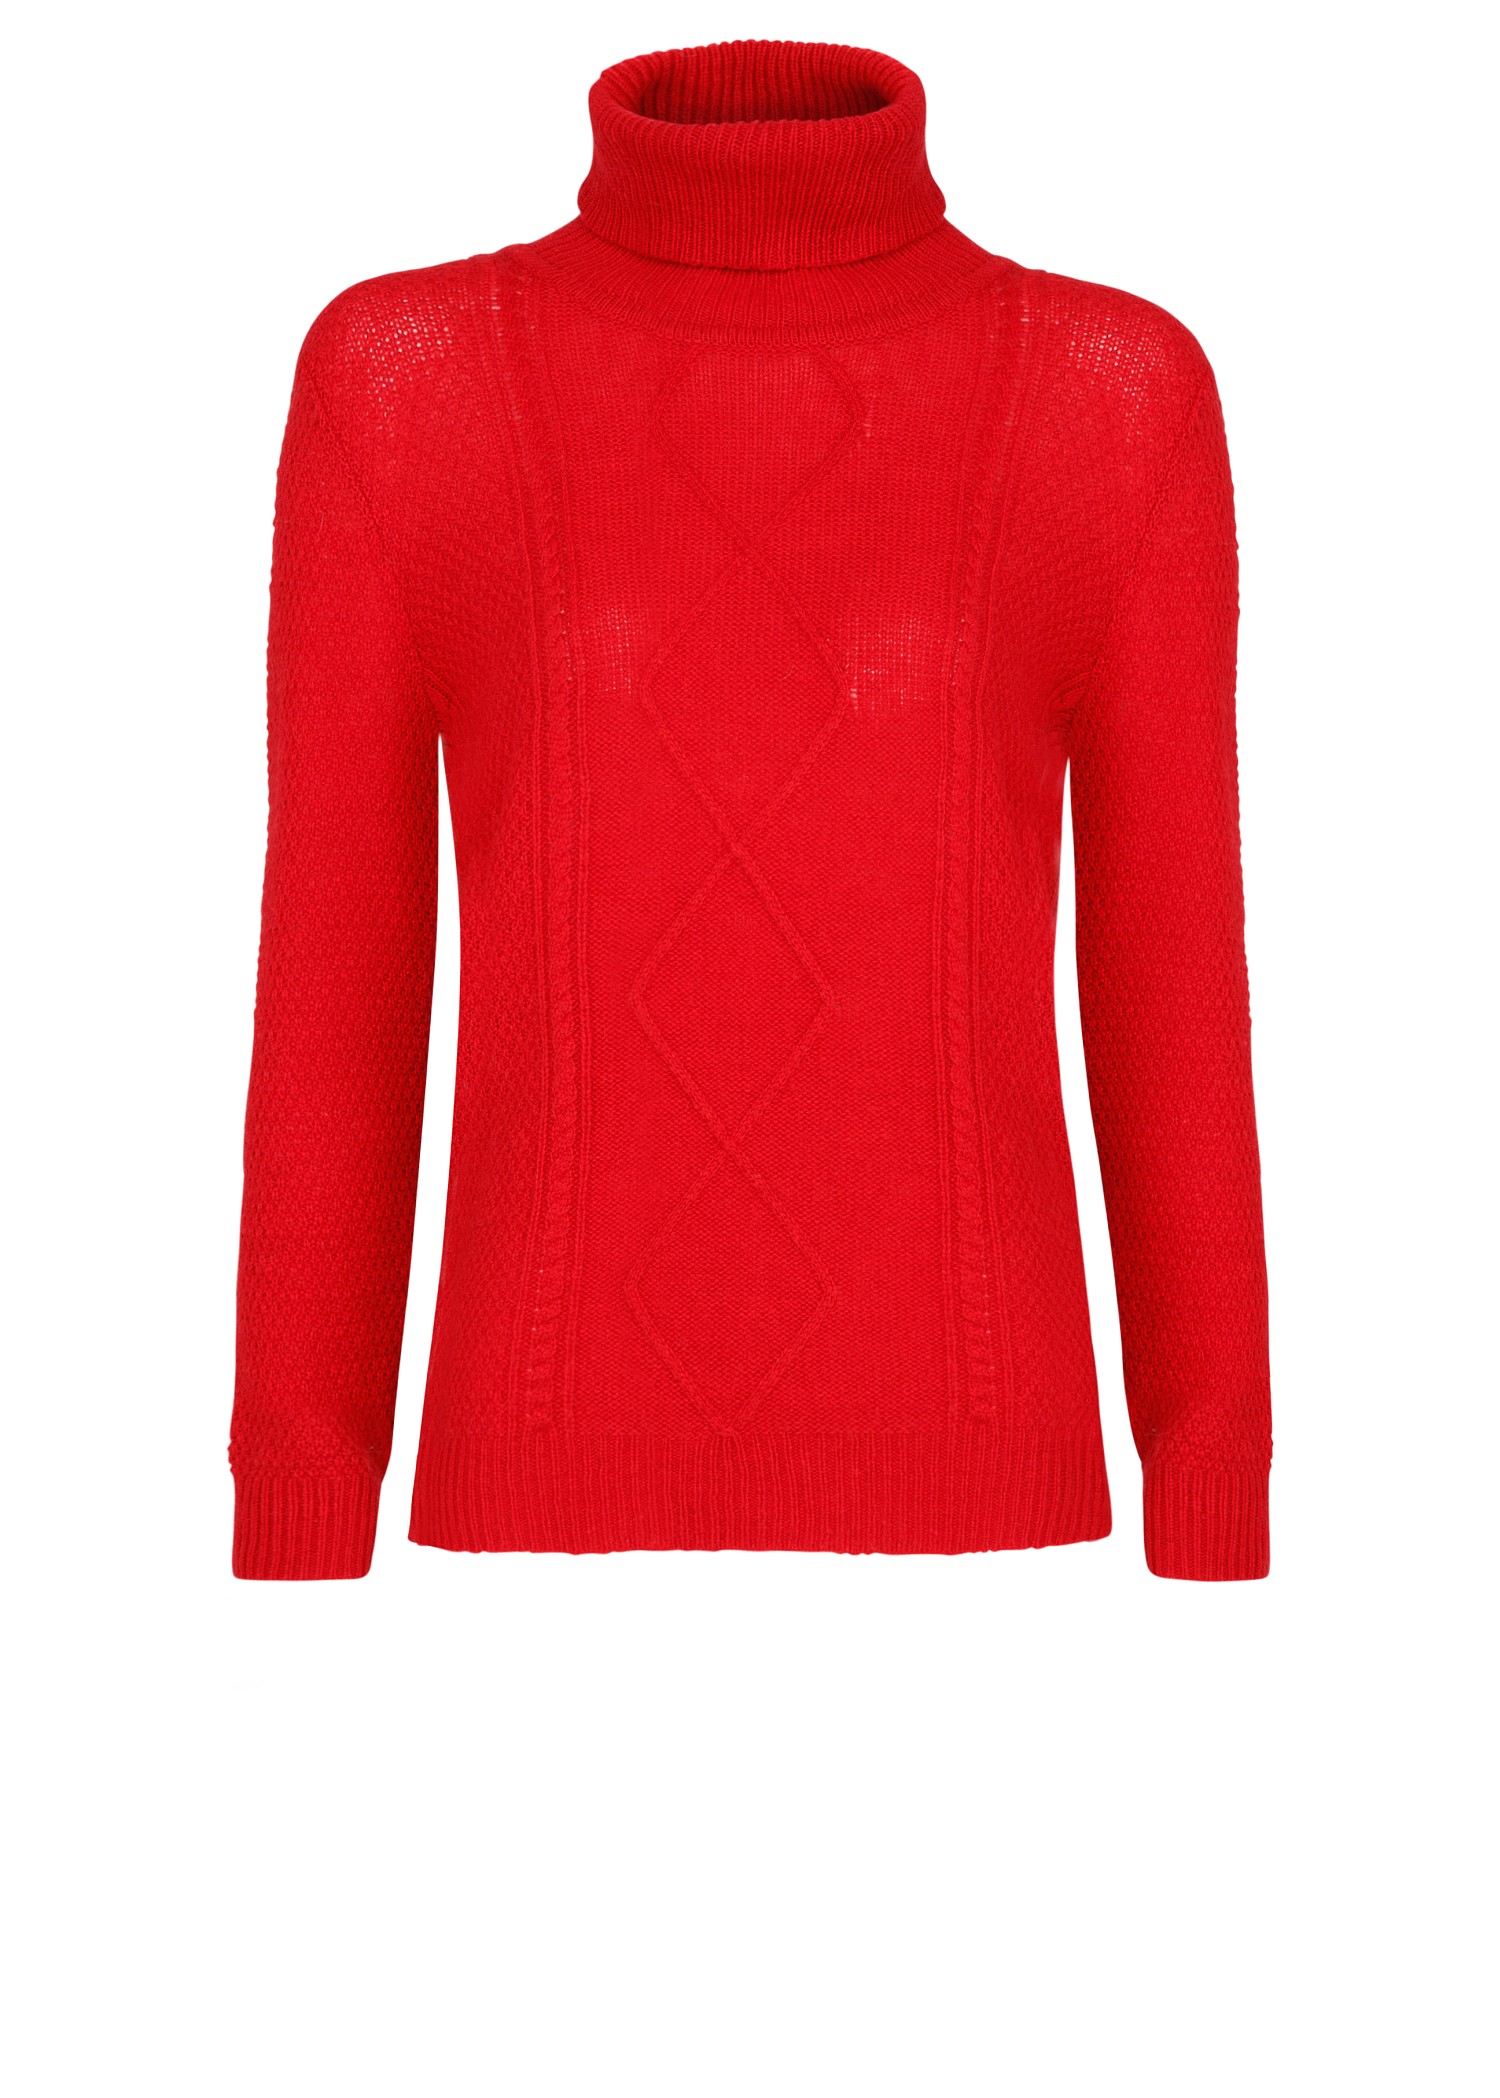 Lyst - Mango Cableknit Turtleneck Sweater in Red